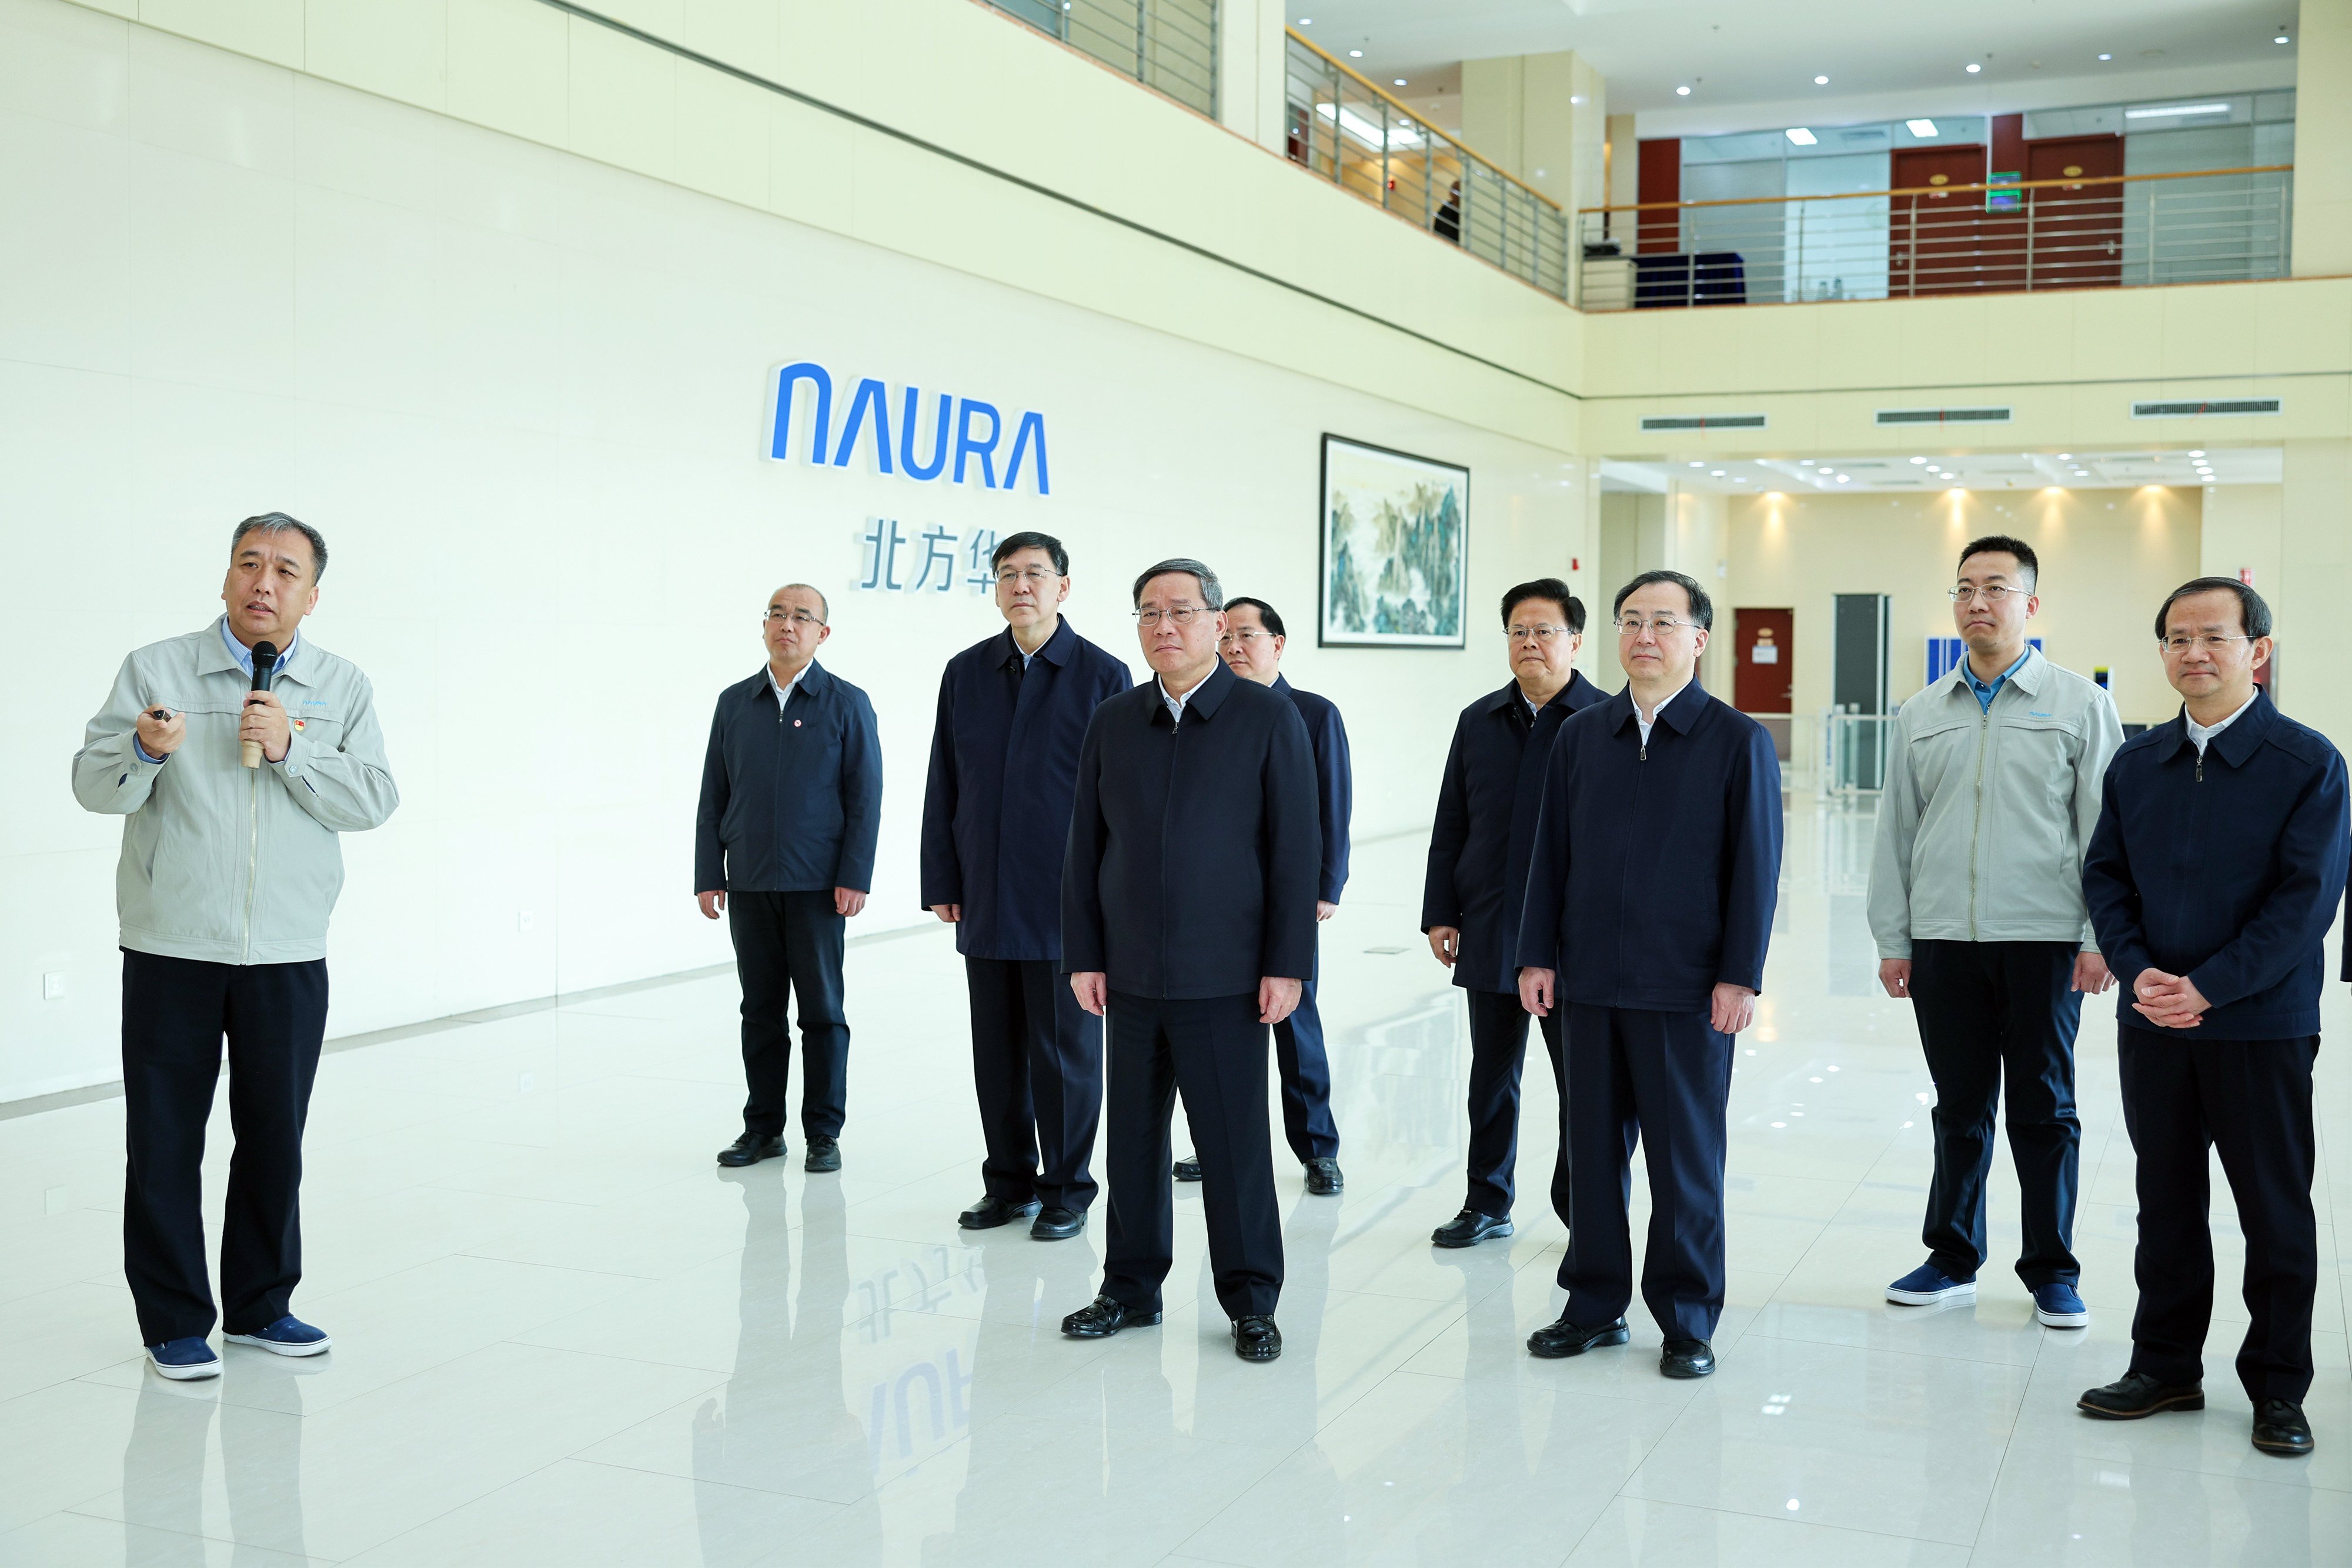 Premier Li Qiang visits Naura Technology Group during an inspection tour on Wednesday. Photo: Xinhua